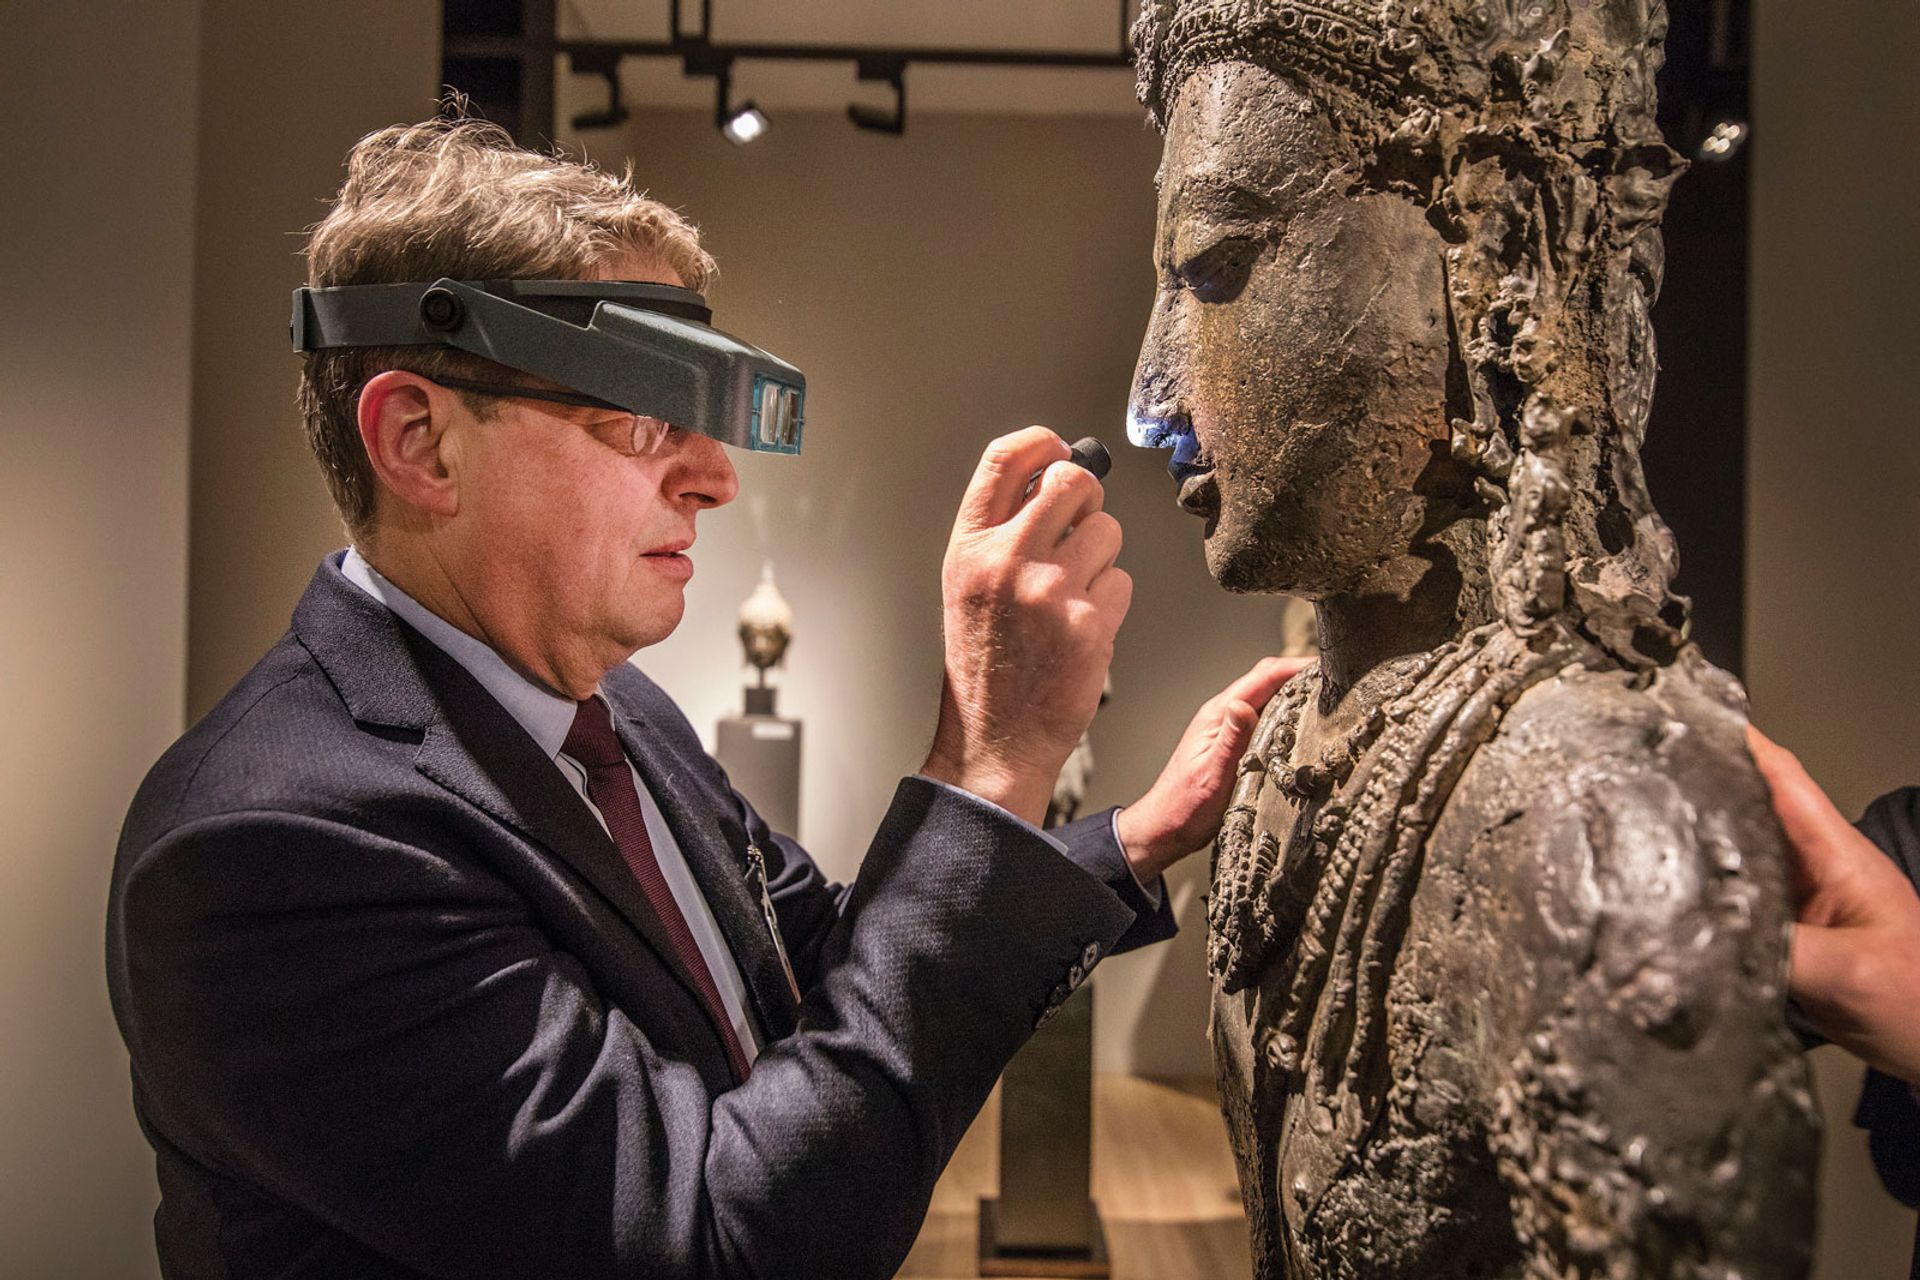 On the nose: an expert vets a sculpture for The European Fine Art Fair (Tefaf) Courtesy of Tefaf; Photo: Loraine Bowdewes